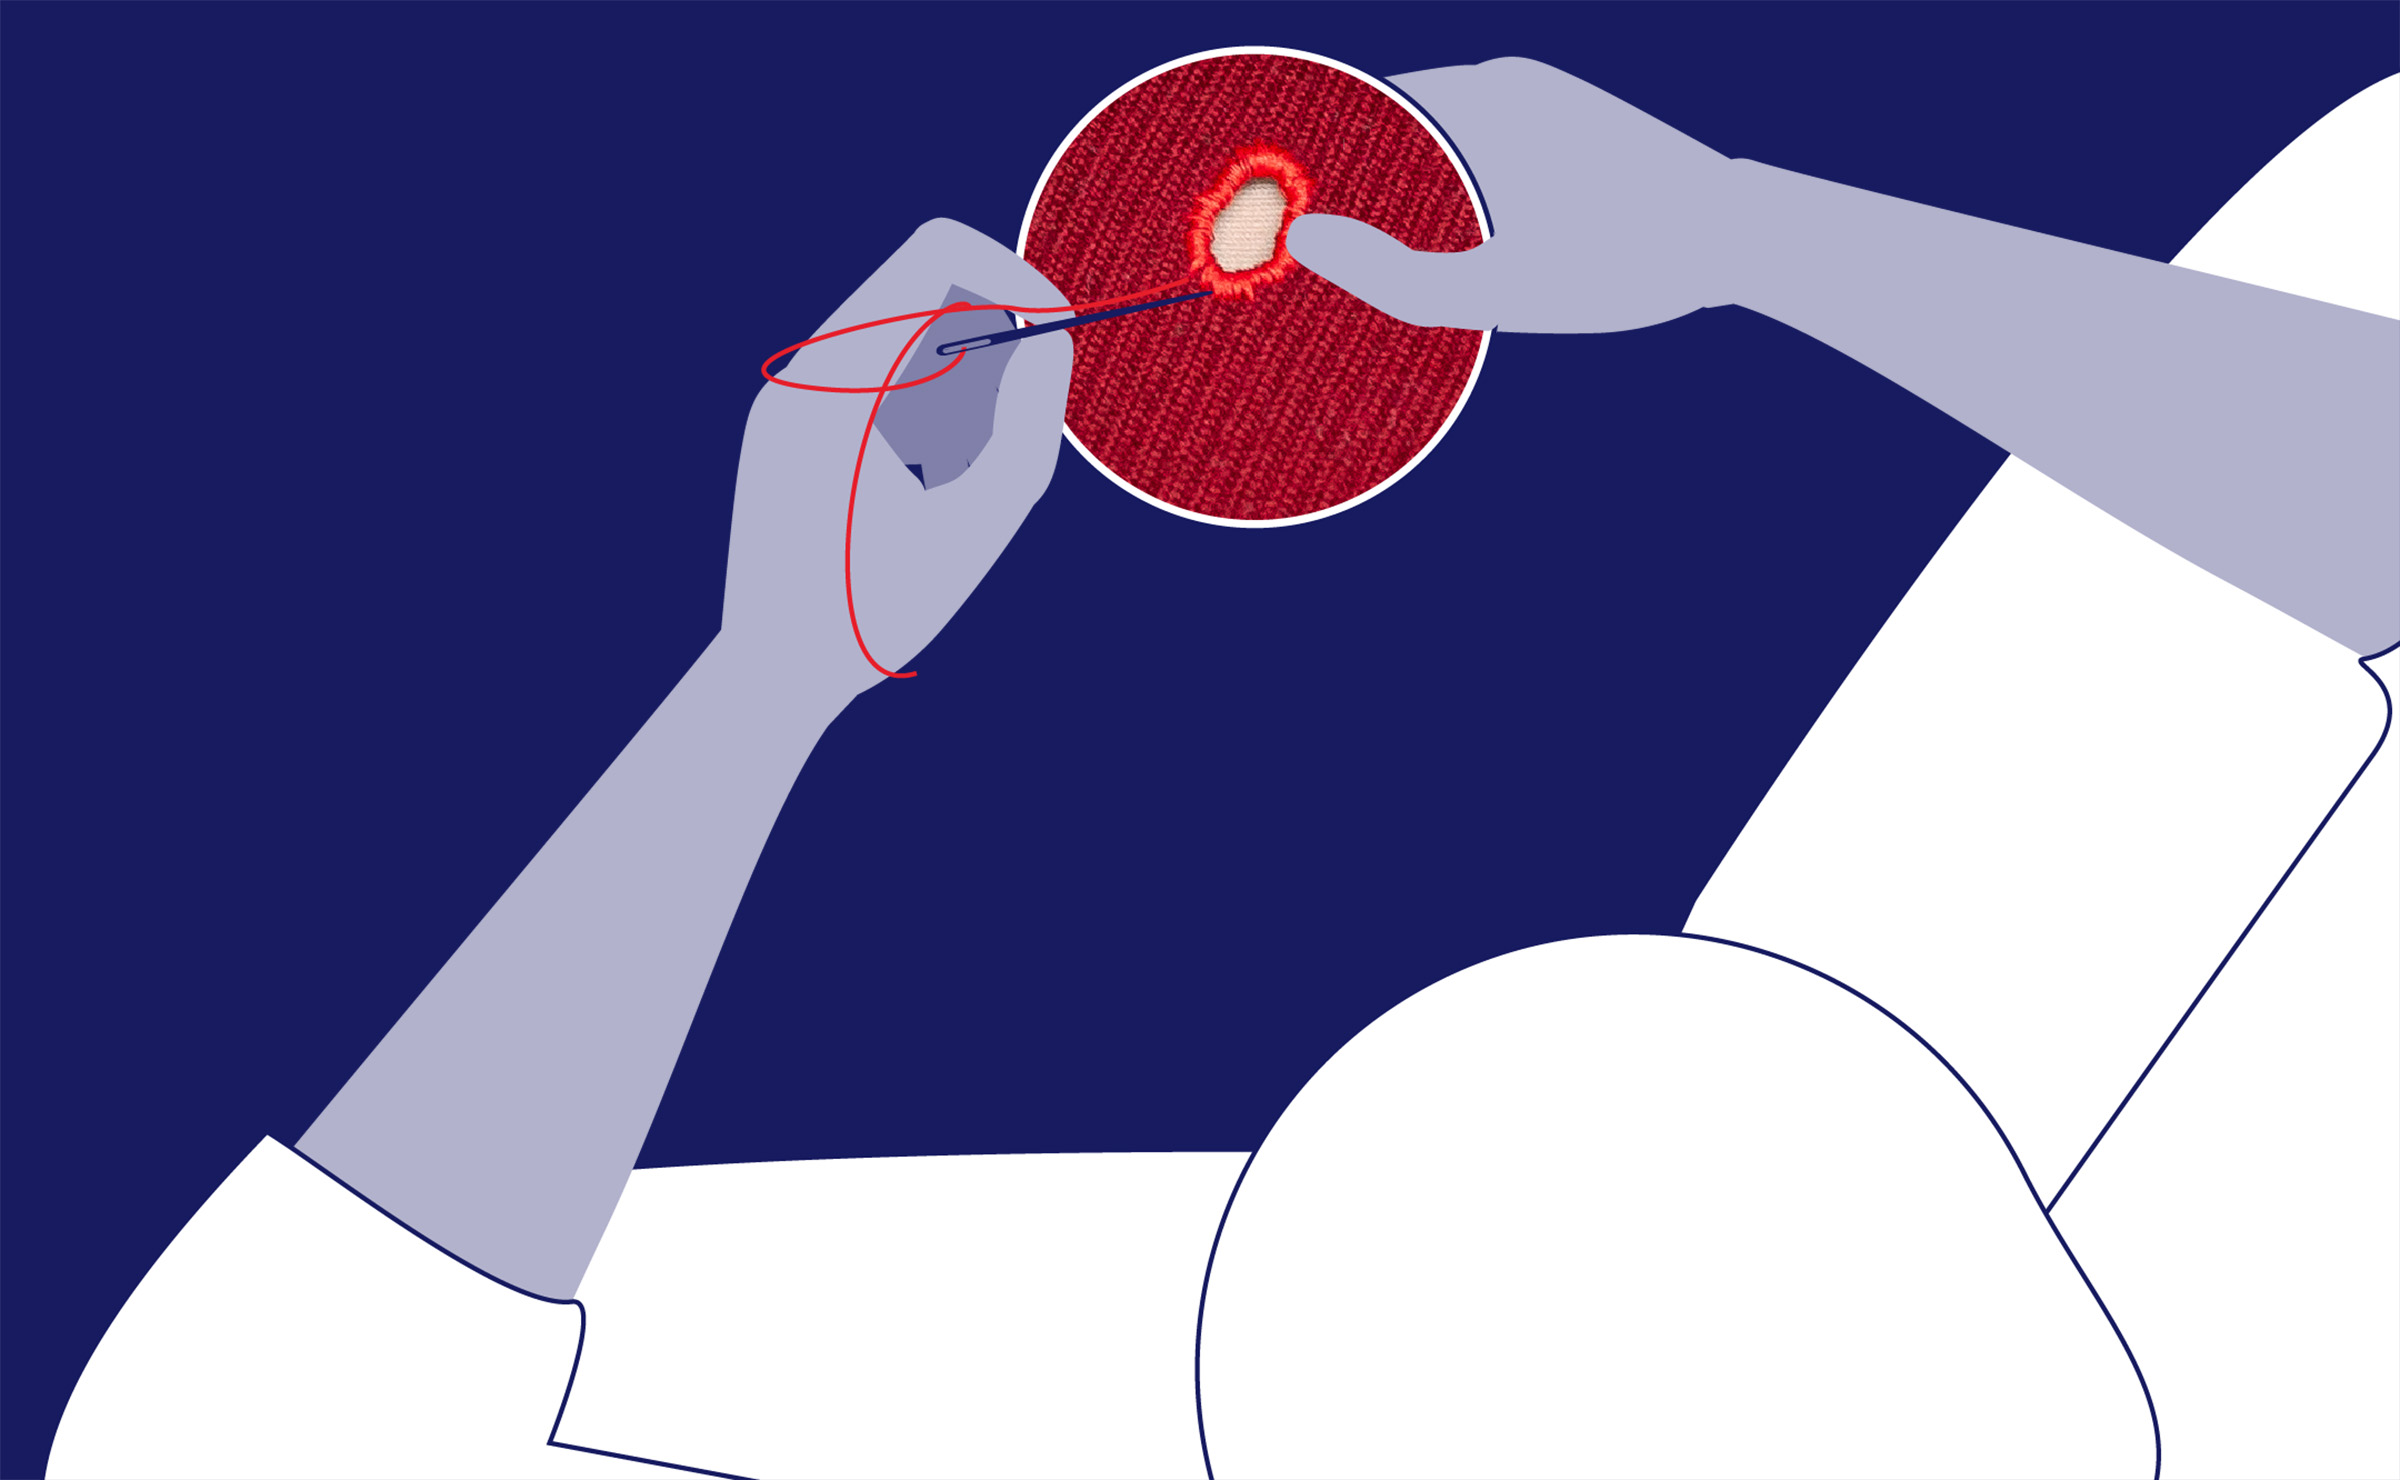 A graphic depiction of a person from the viewpoint of above the person – they have their legs crossed and are mending some fabric with their hands. They’re holding a needle and sewing into a red piece of fabric with a hole in it. 